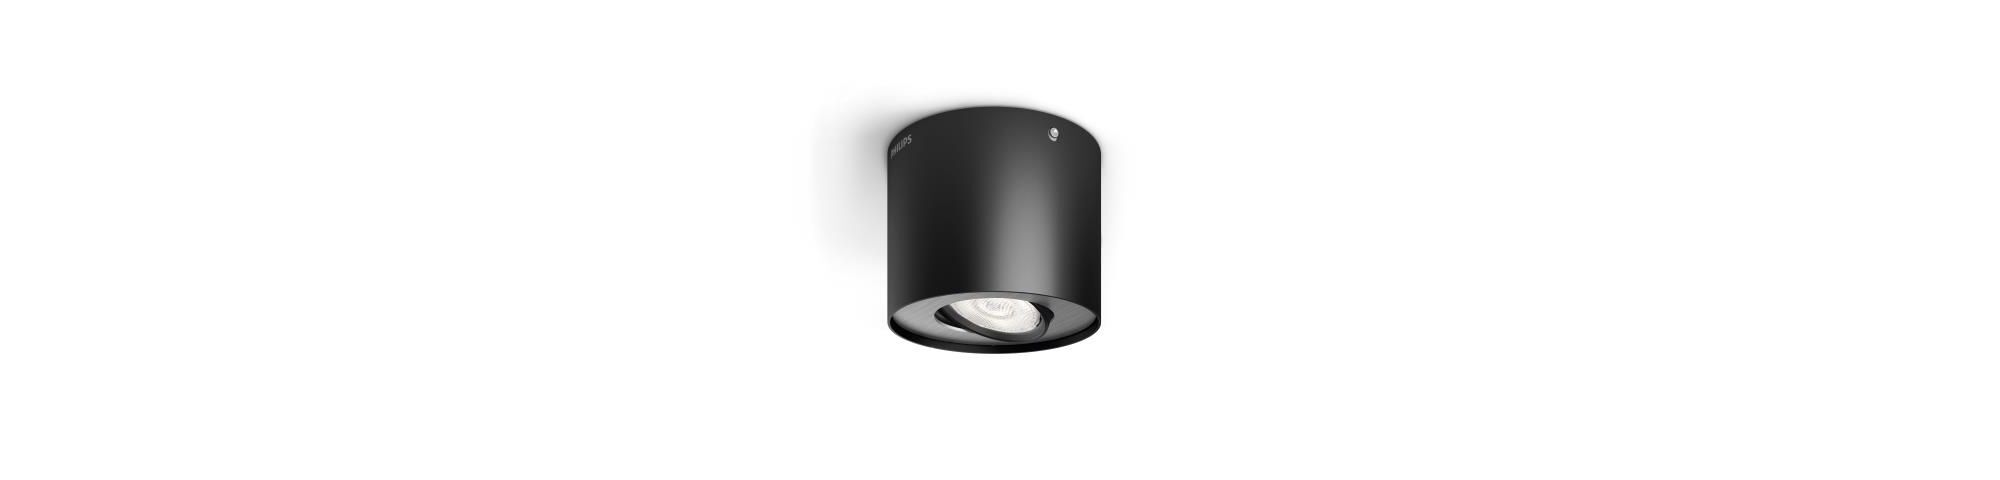 Philips myLiving Dimmable light Phase single spot light